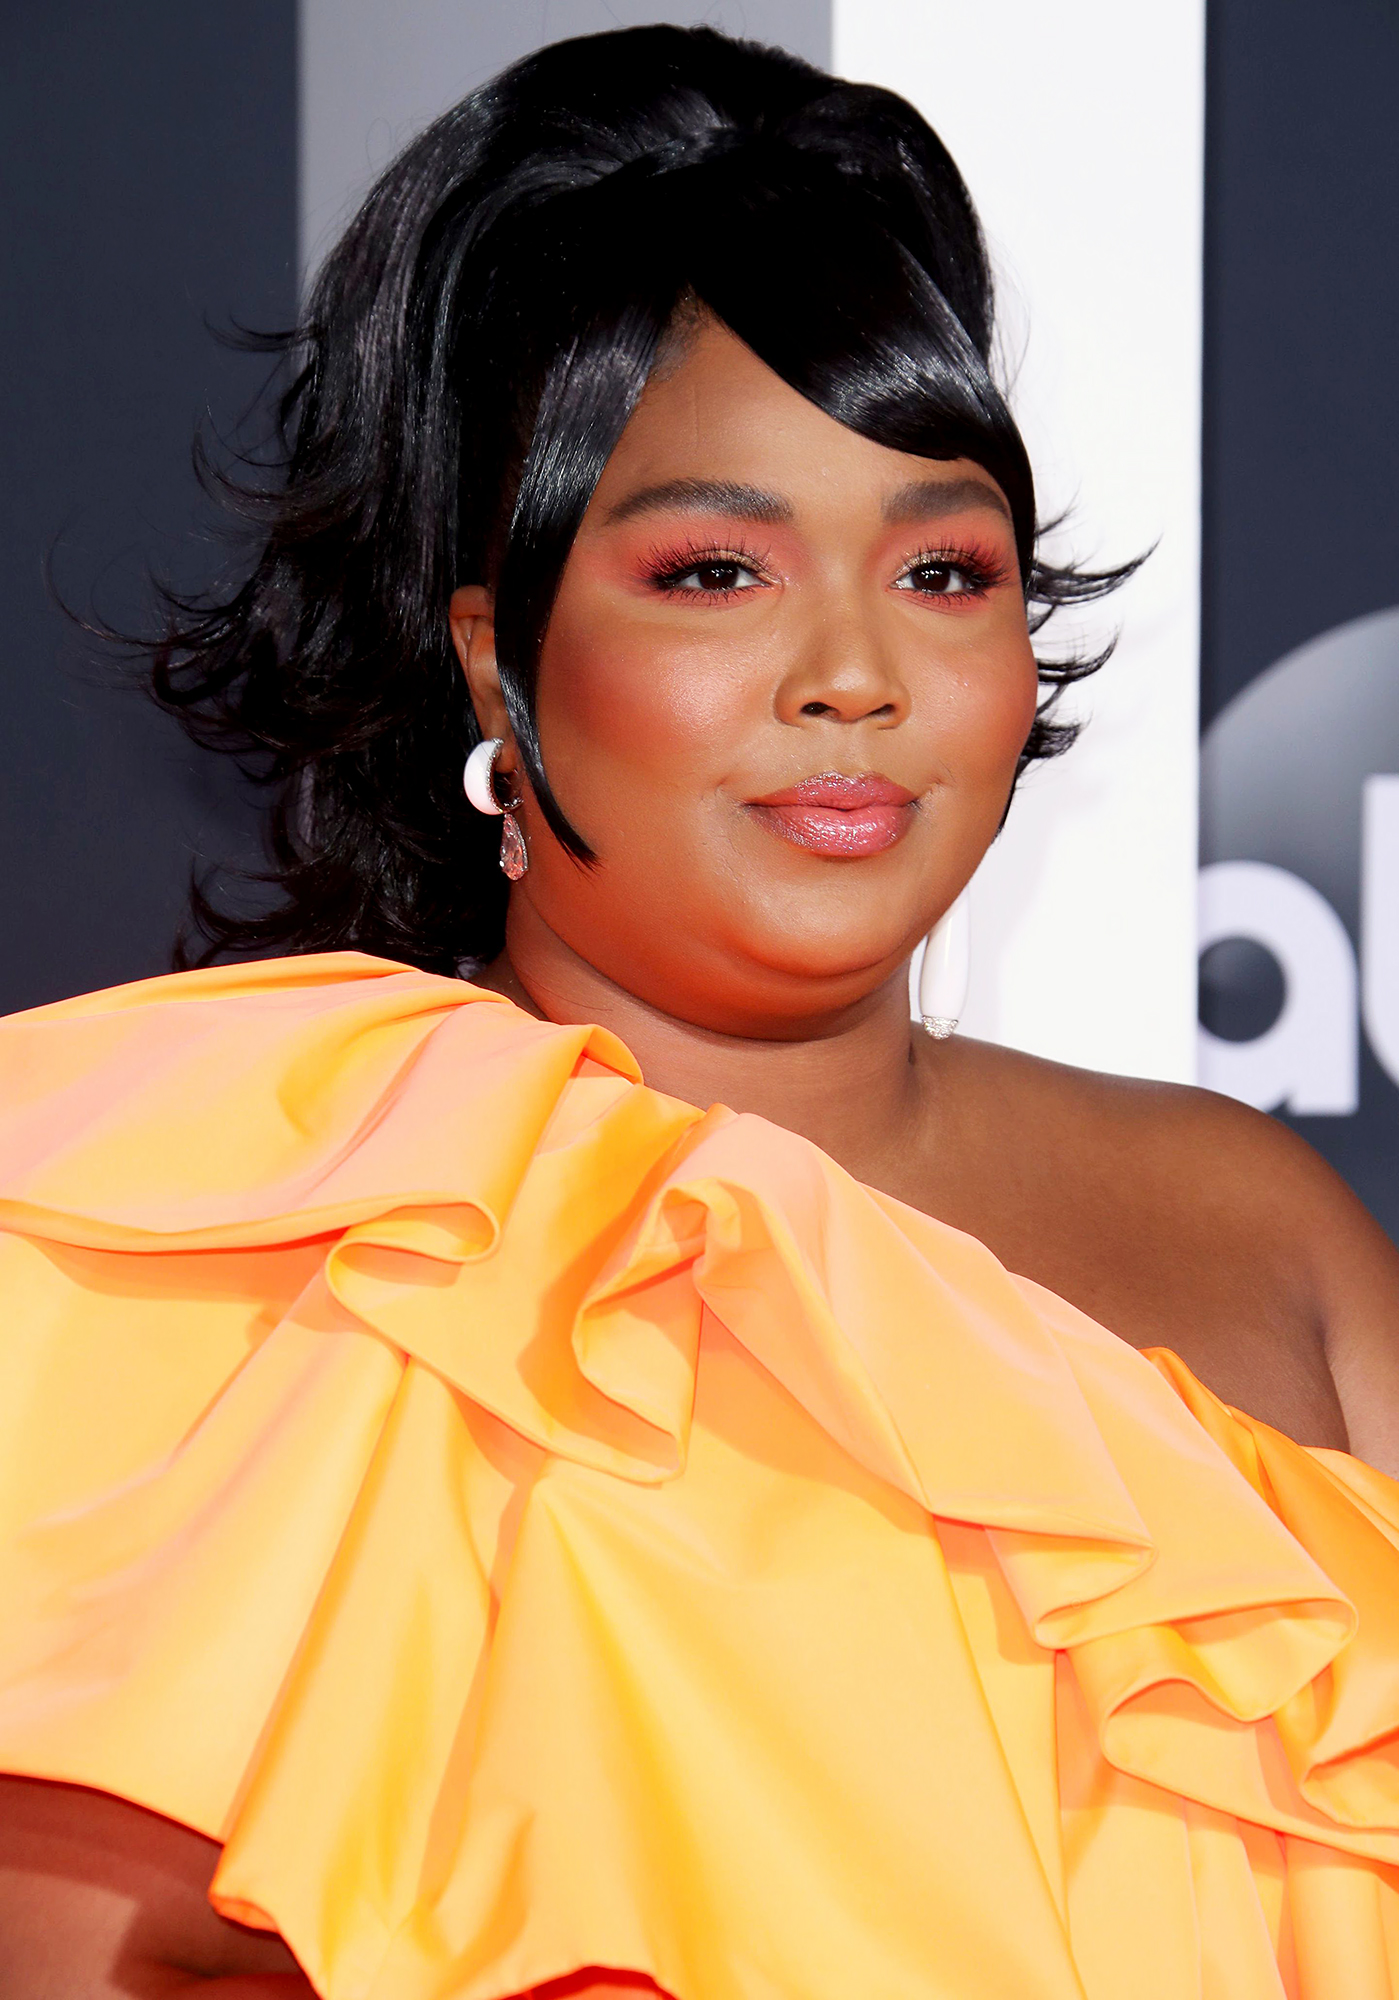 Lizzo Takes Valentino Purse to the AMAs, Spawning Memes